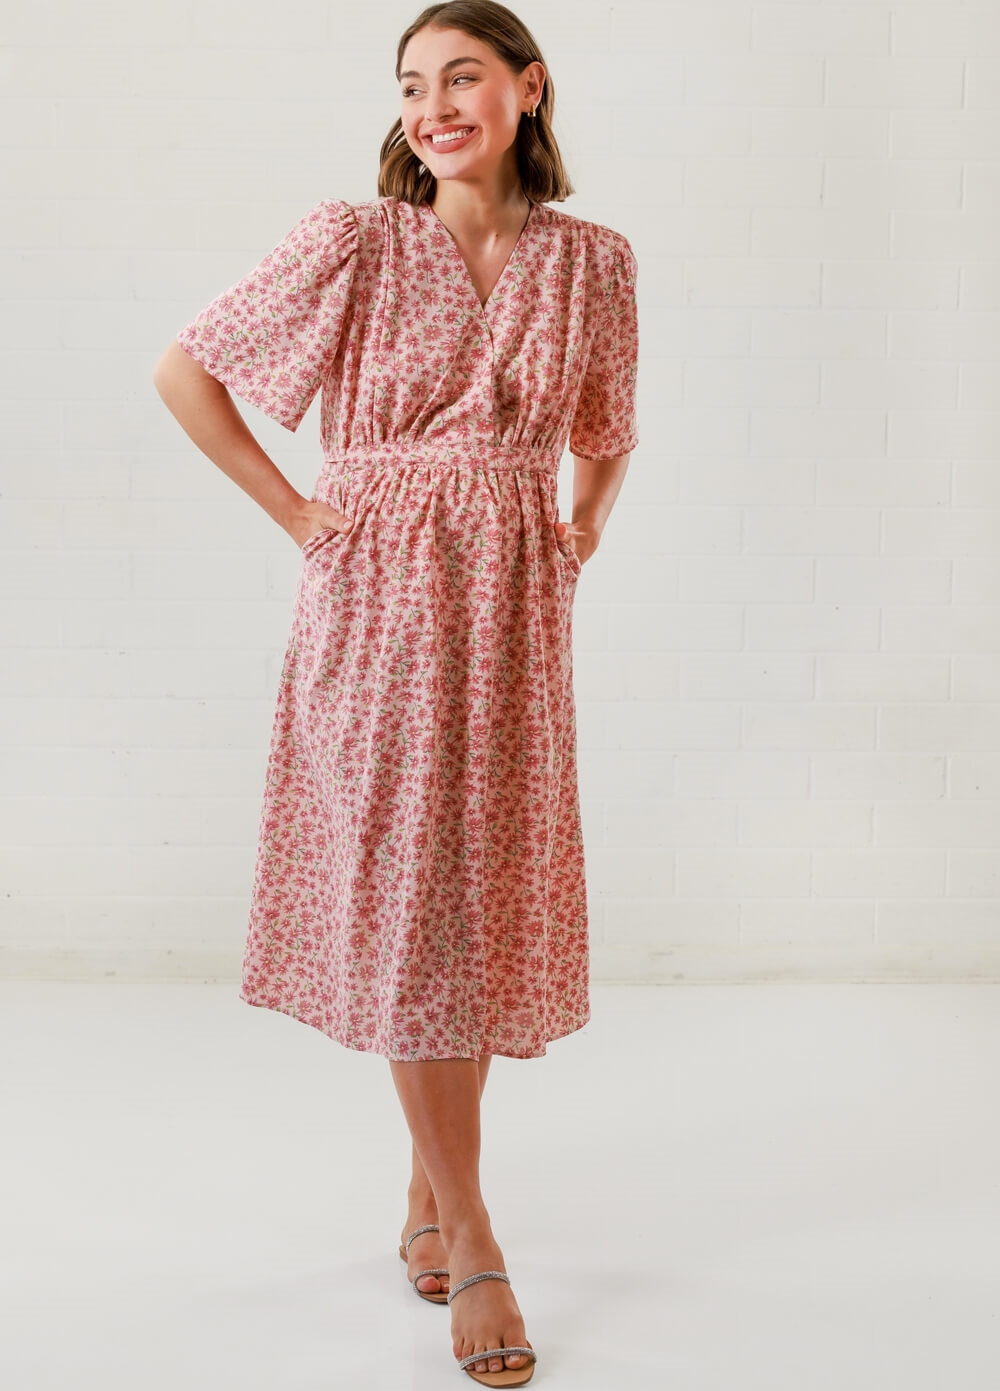 Lait & Co - Lucie-Marie Maternity Dress in Pink Floral